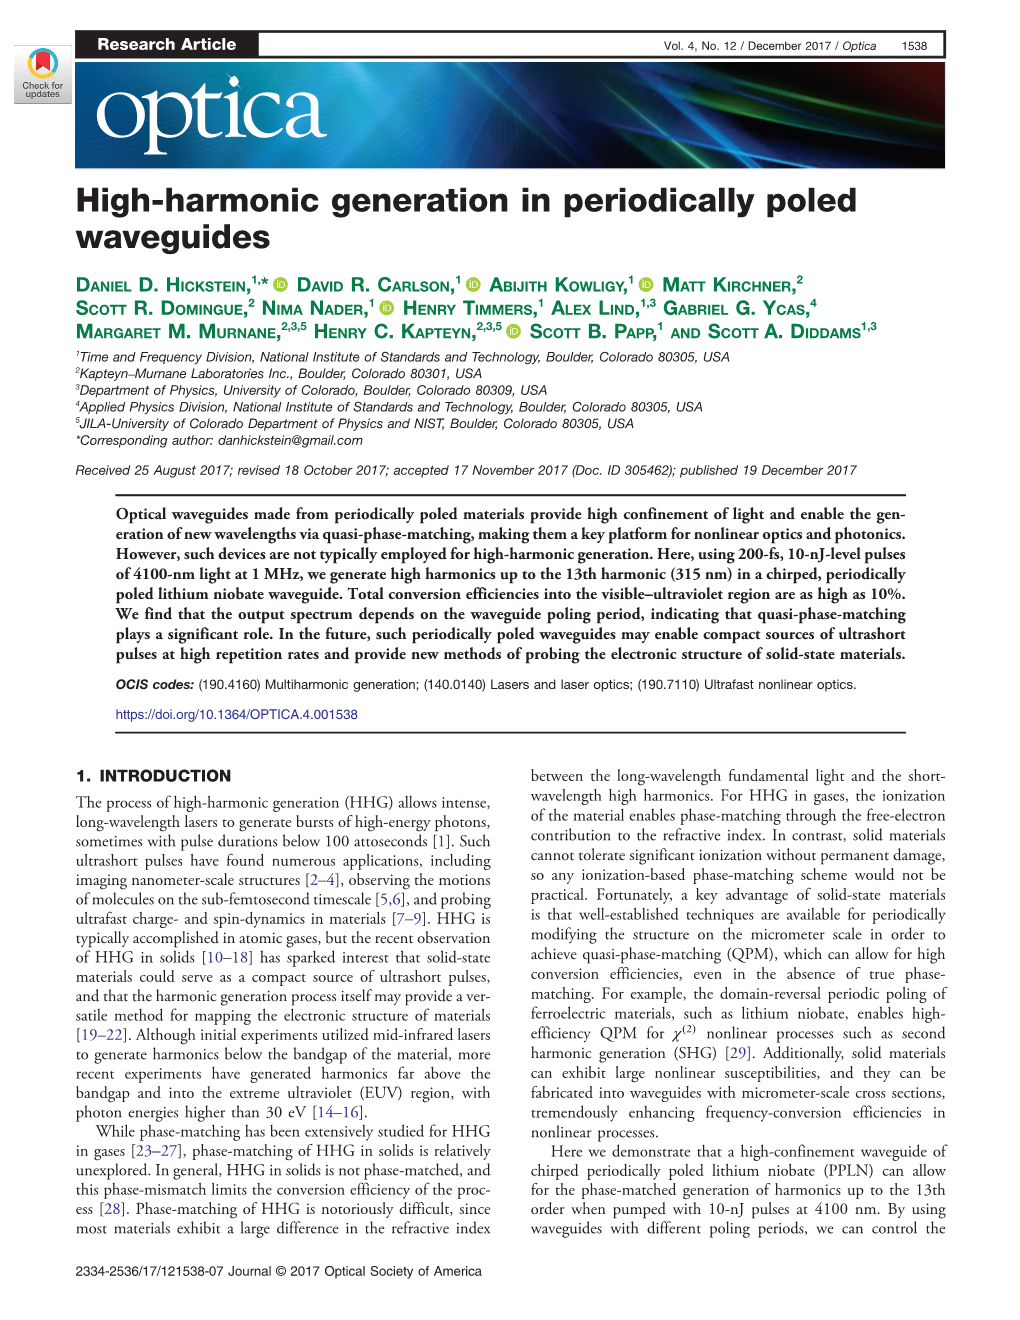 High-Harmonic Generation in Periodically Poled Waveguides